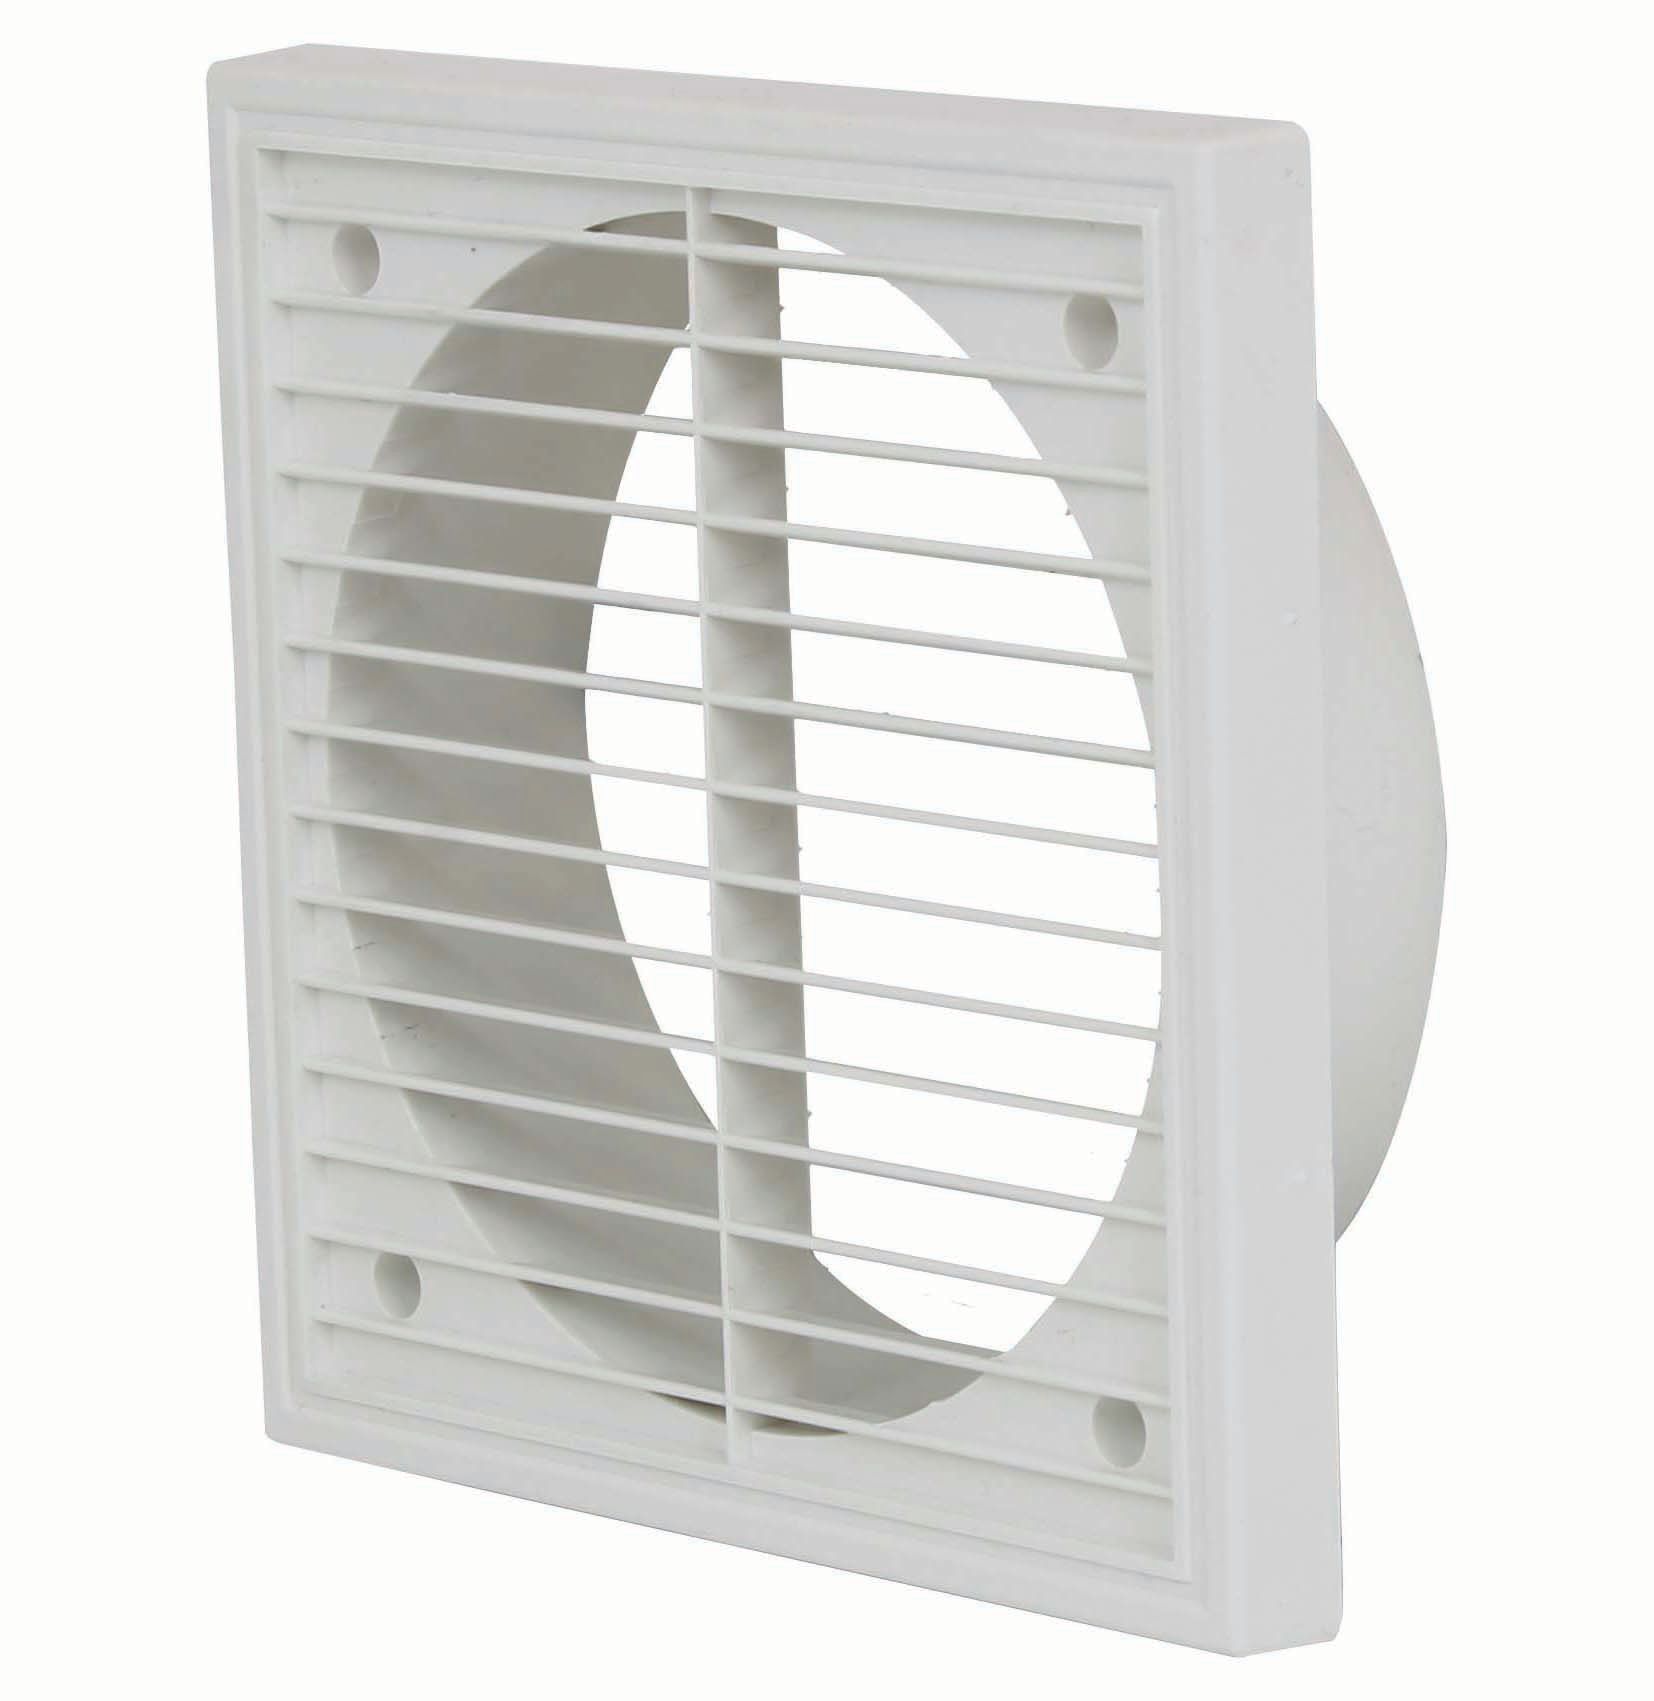 Image of Manrose PVC External Wall Grille - White 150mm